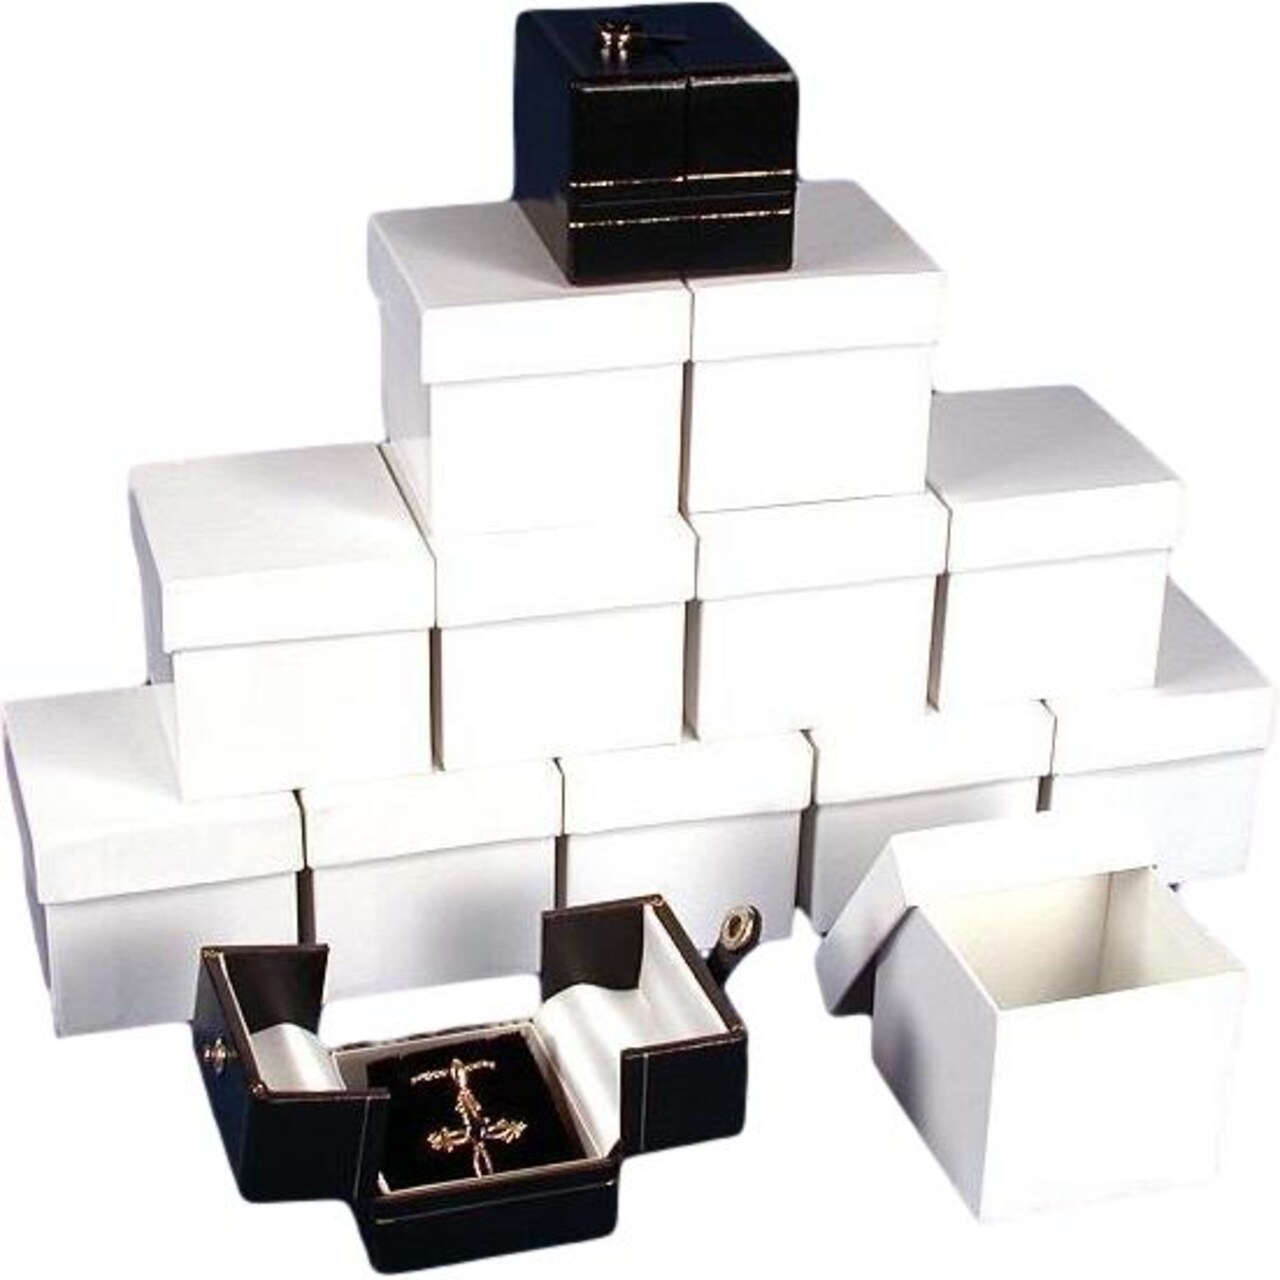 12 Earring Boxes Black & White Snap Lid Gift Display